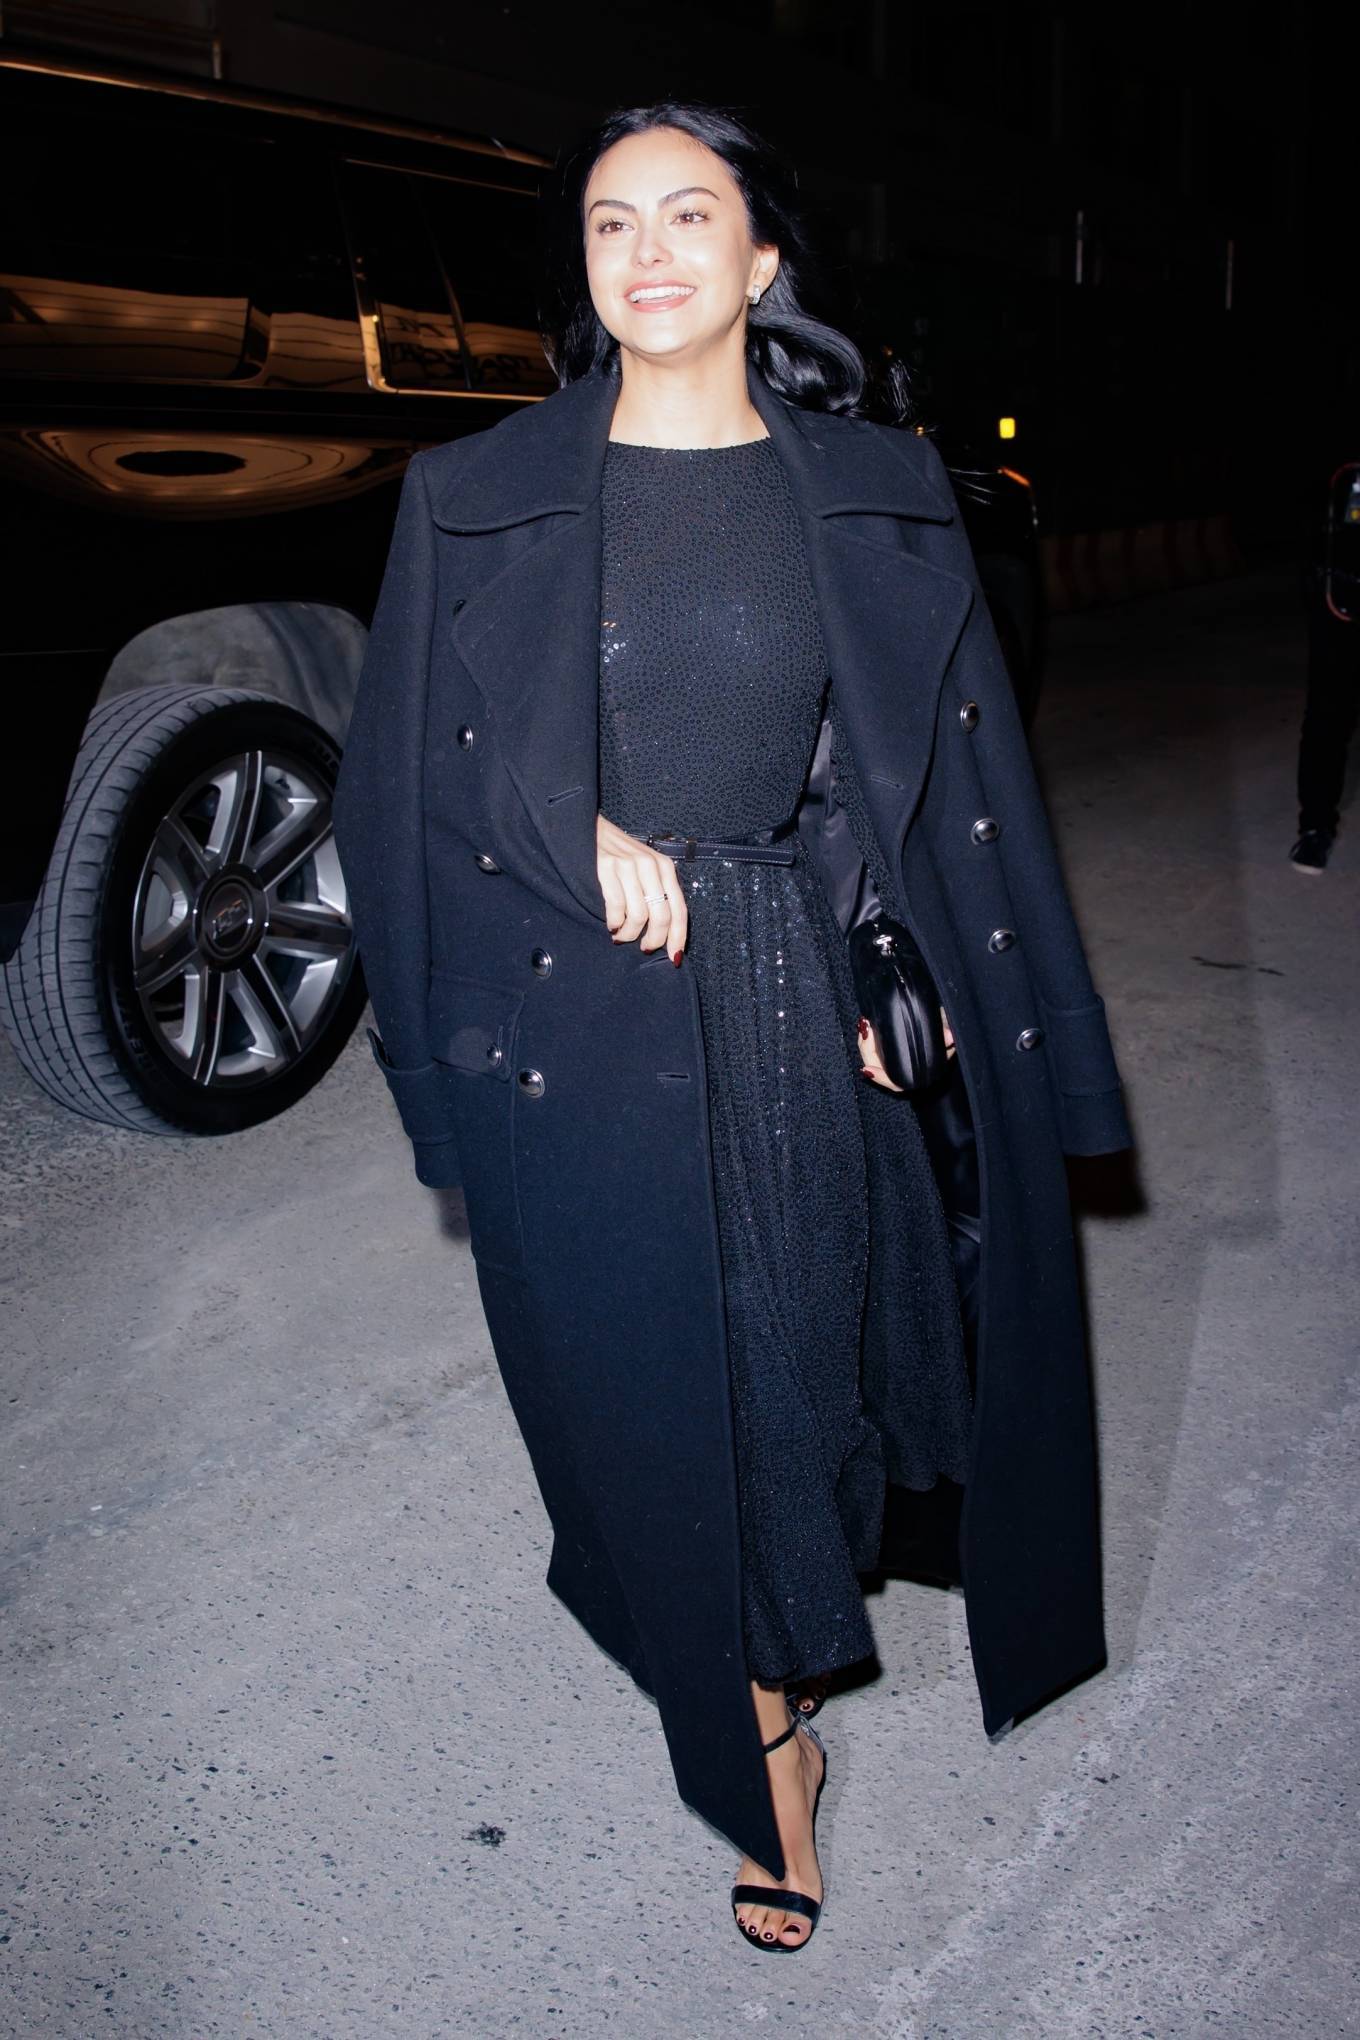 Camila Mendes 2022 : Camila Mendes – In all black arrives to the Michael Kors fashion show during NYFW-01